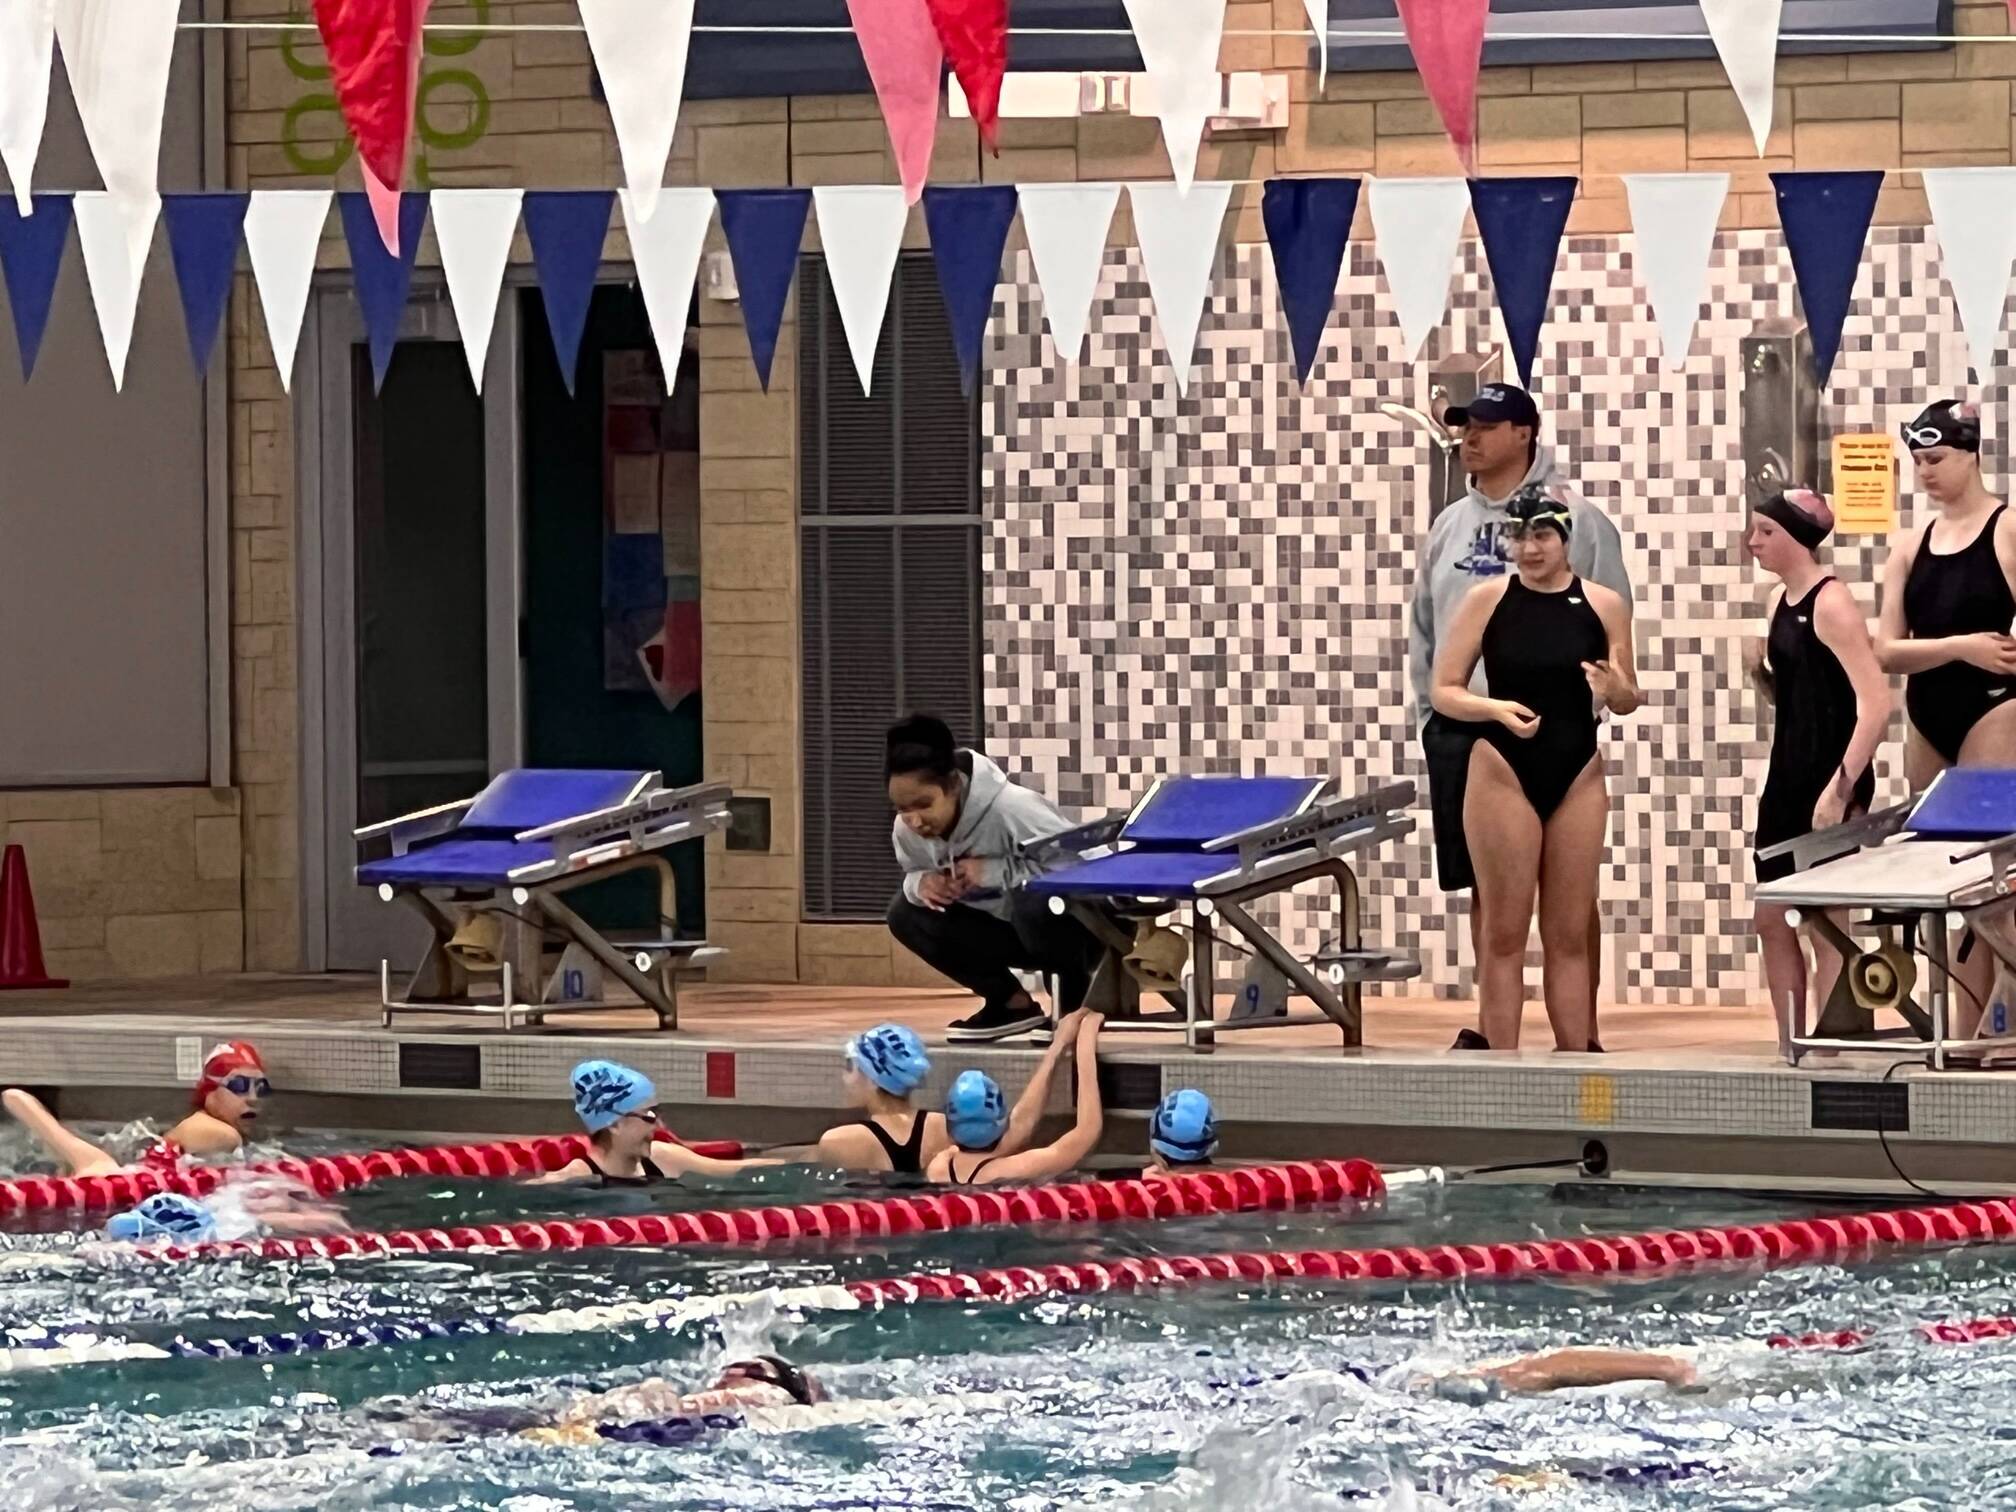 Photo provided
North Whidbey Aquatic Club members prepare for their races at a meet at the Snohomish Aquatic Center March 19.